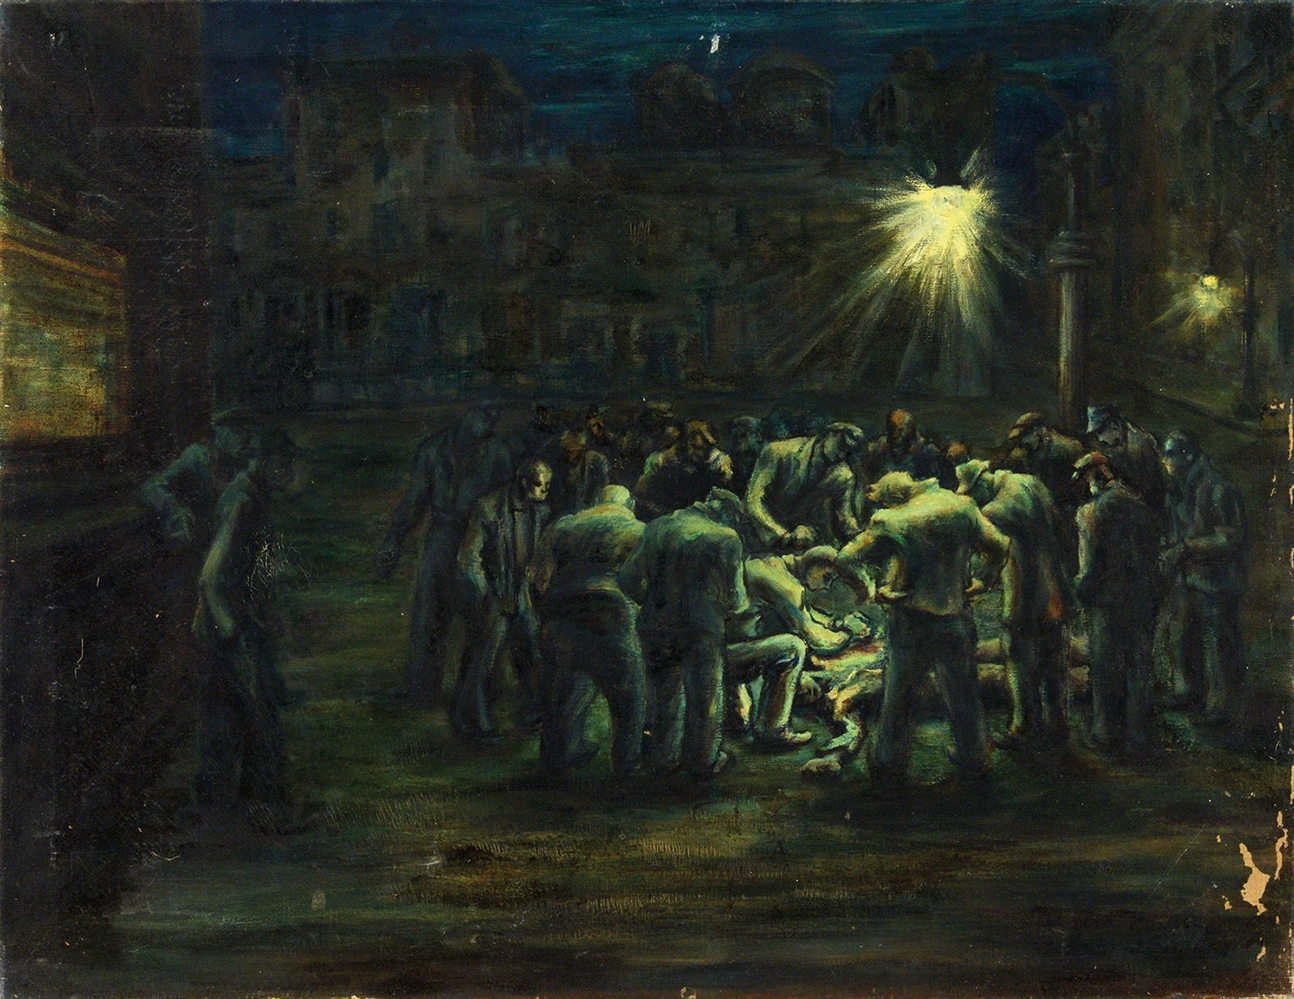 ALZIRA (BOEHM) PEIRCE (AMERICAN, 1908-2010) TWO WORKS: NIGHTTIME SHOOTING AND "ARRIVAL"                                                                                                                 